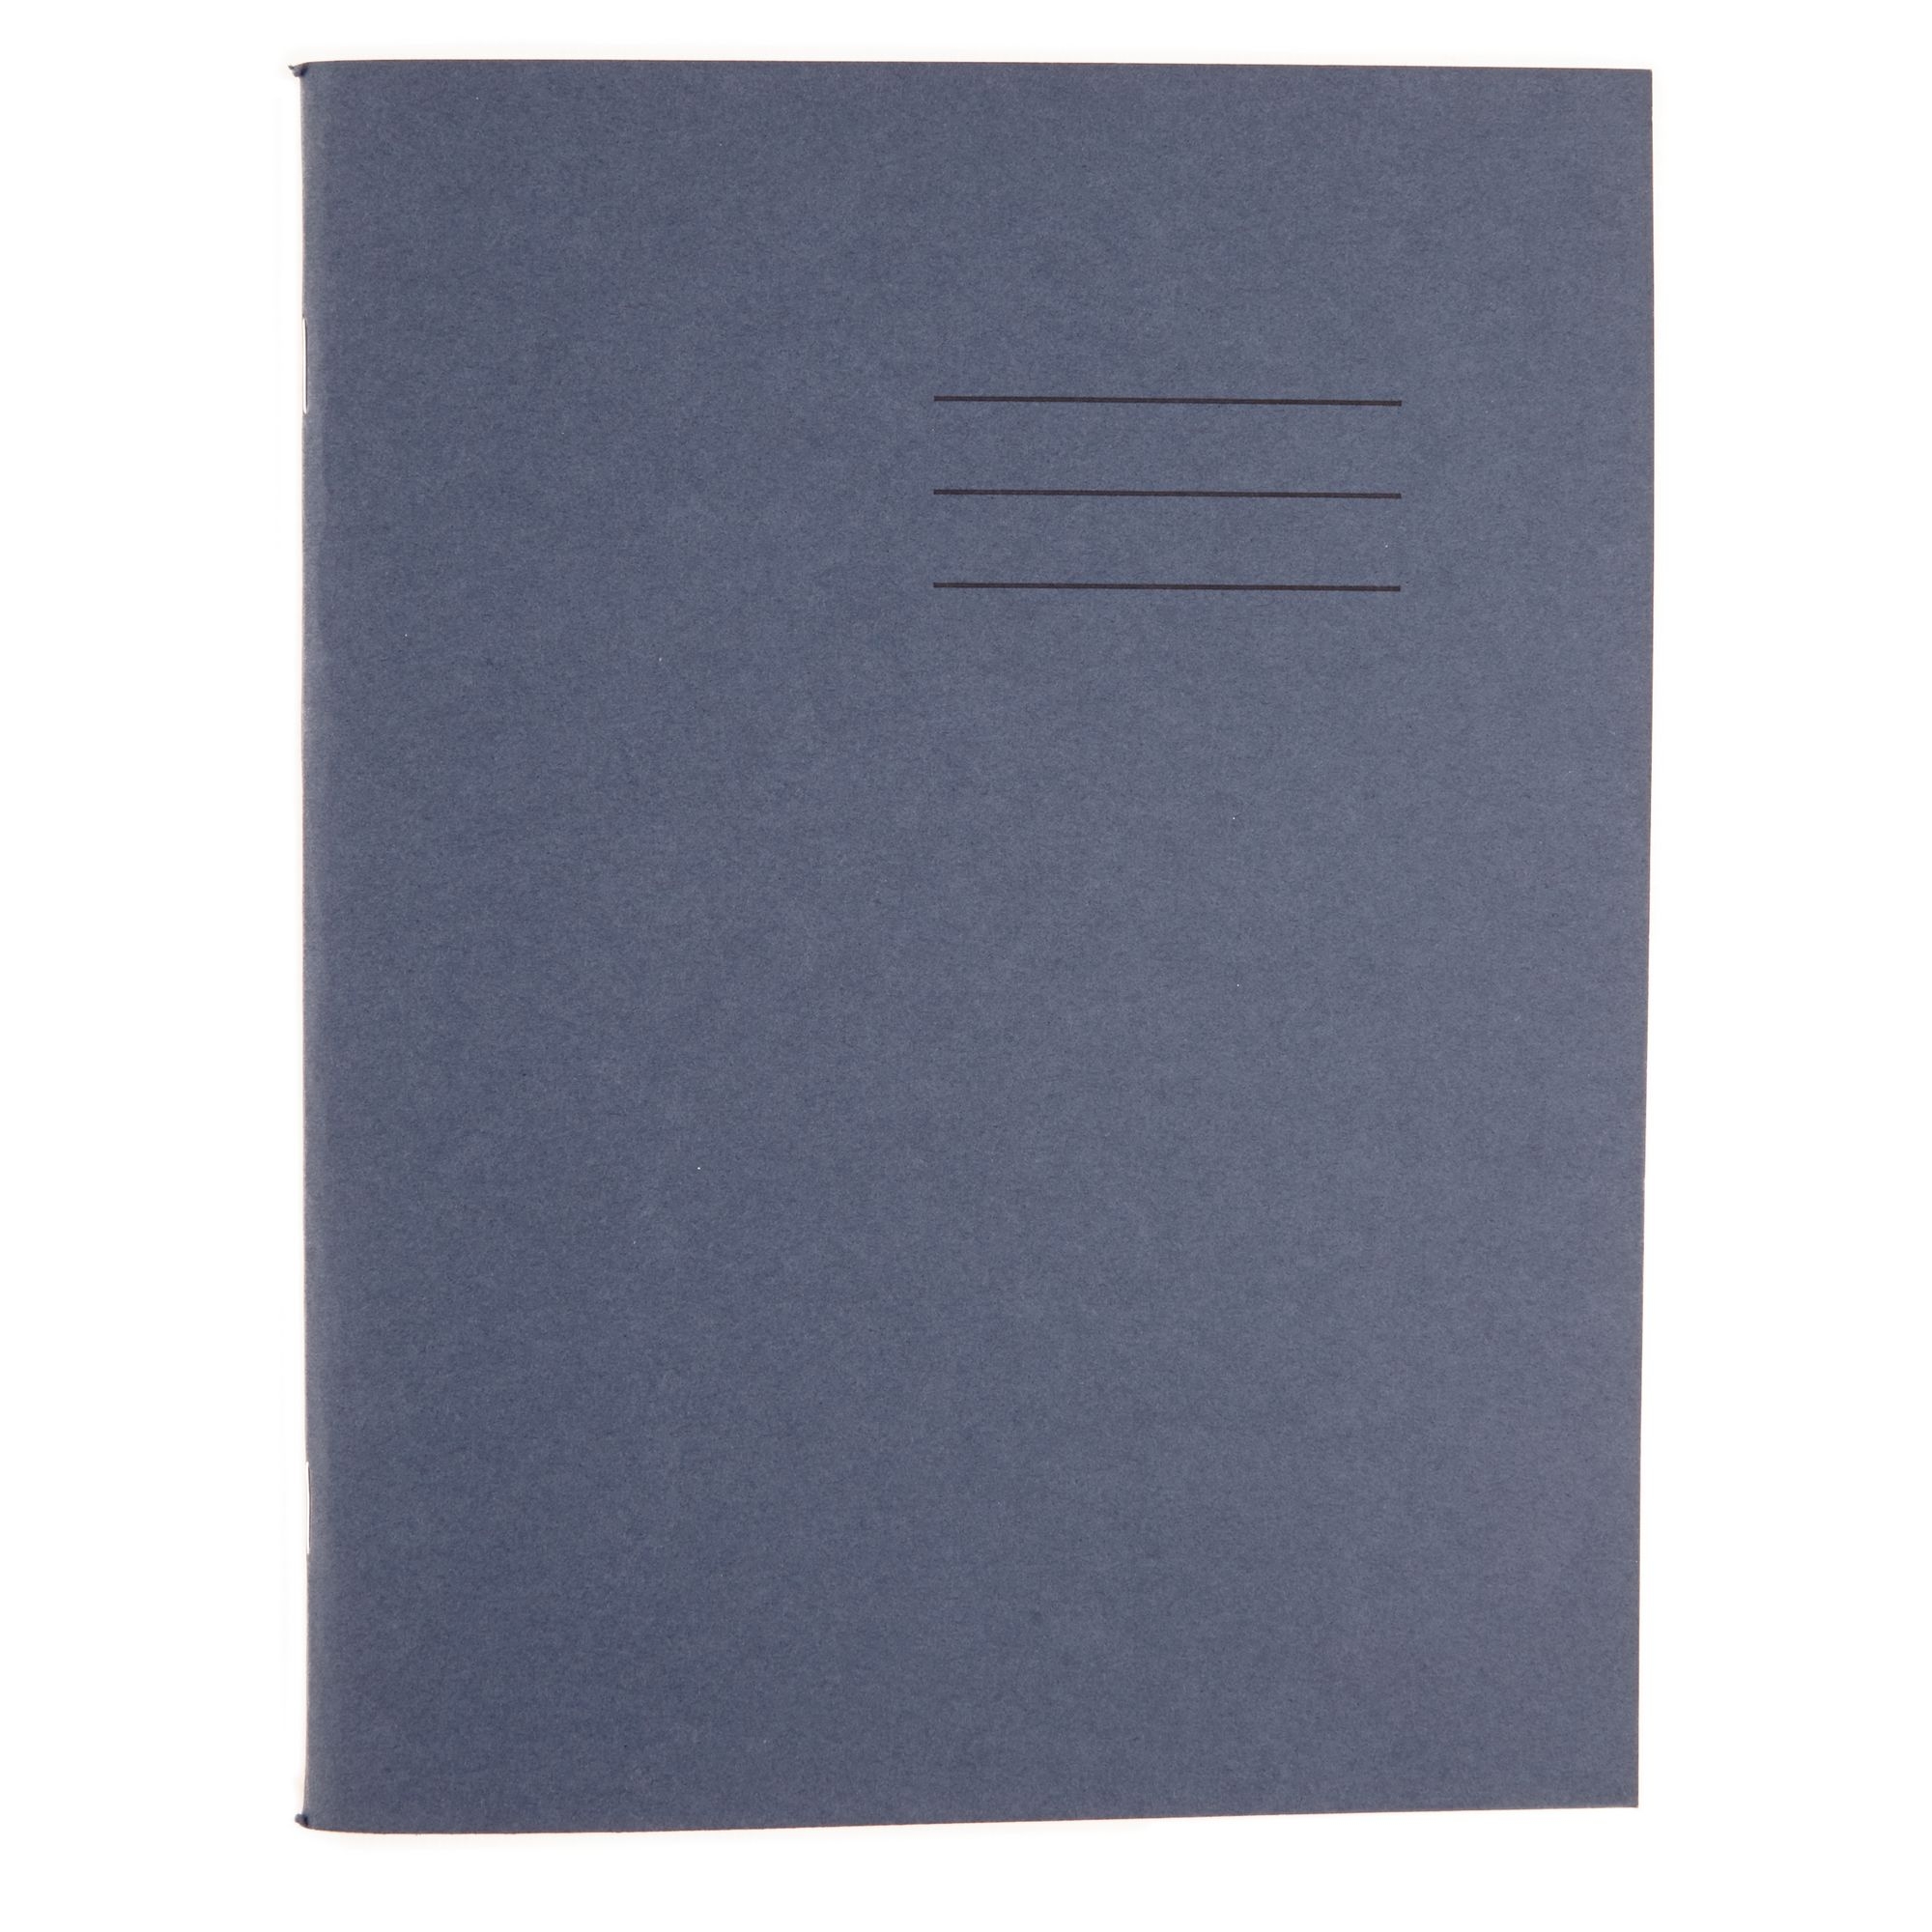 9x7 Exercise Book 48 Page, 8mm Ruled with Margin, Dark Blue - Pack of 100